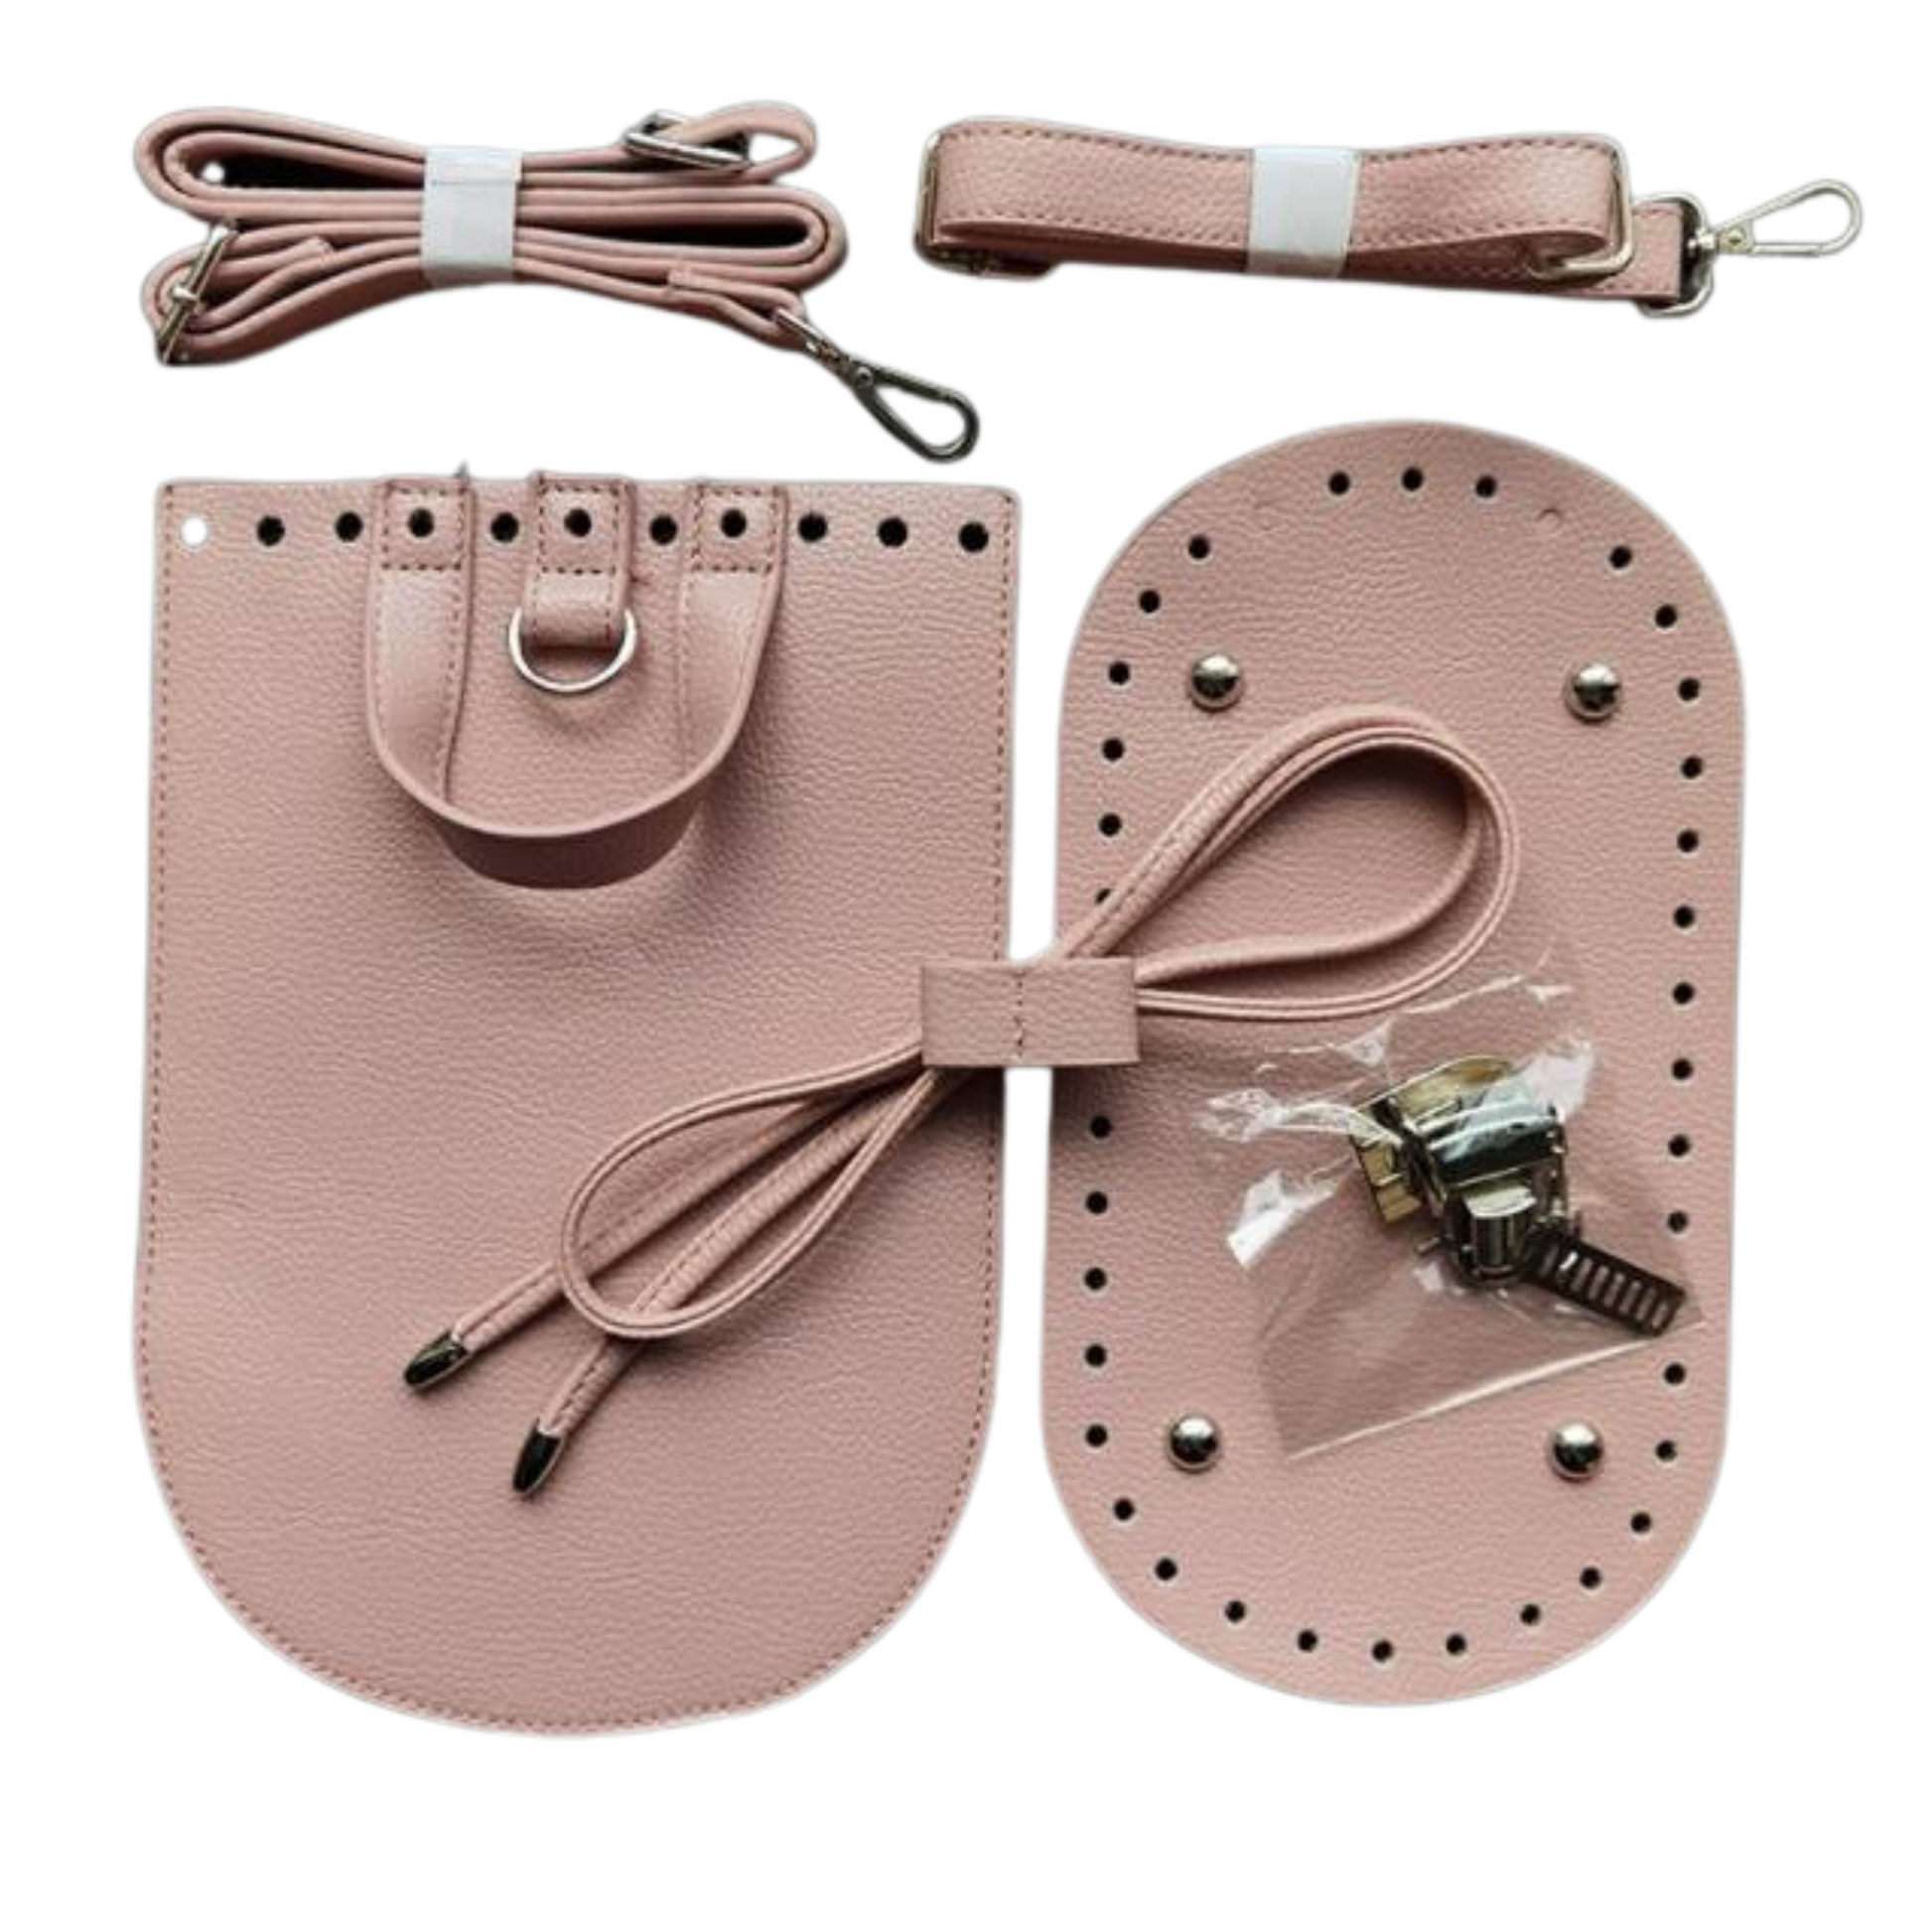 Kit for Crochet and Knitting Backpack Genuine Leather Set With Bottom  25x12, Diy Crochet, How to Tie a Backpack, Items for Crochet Backpack 